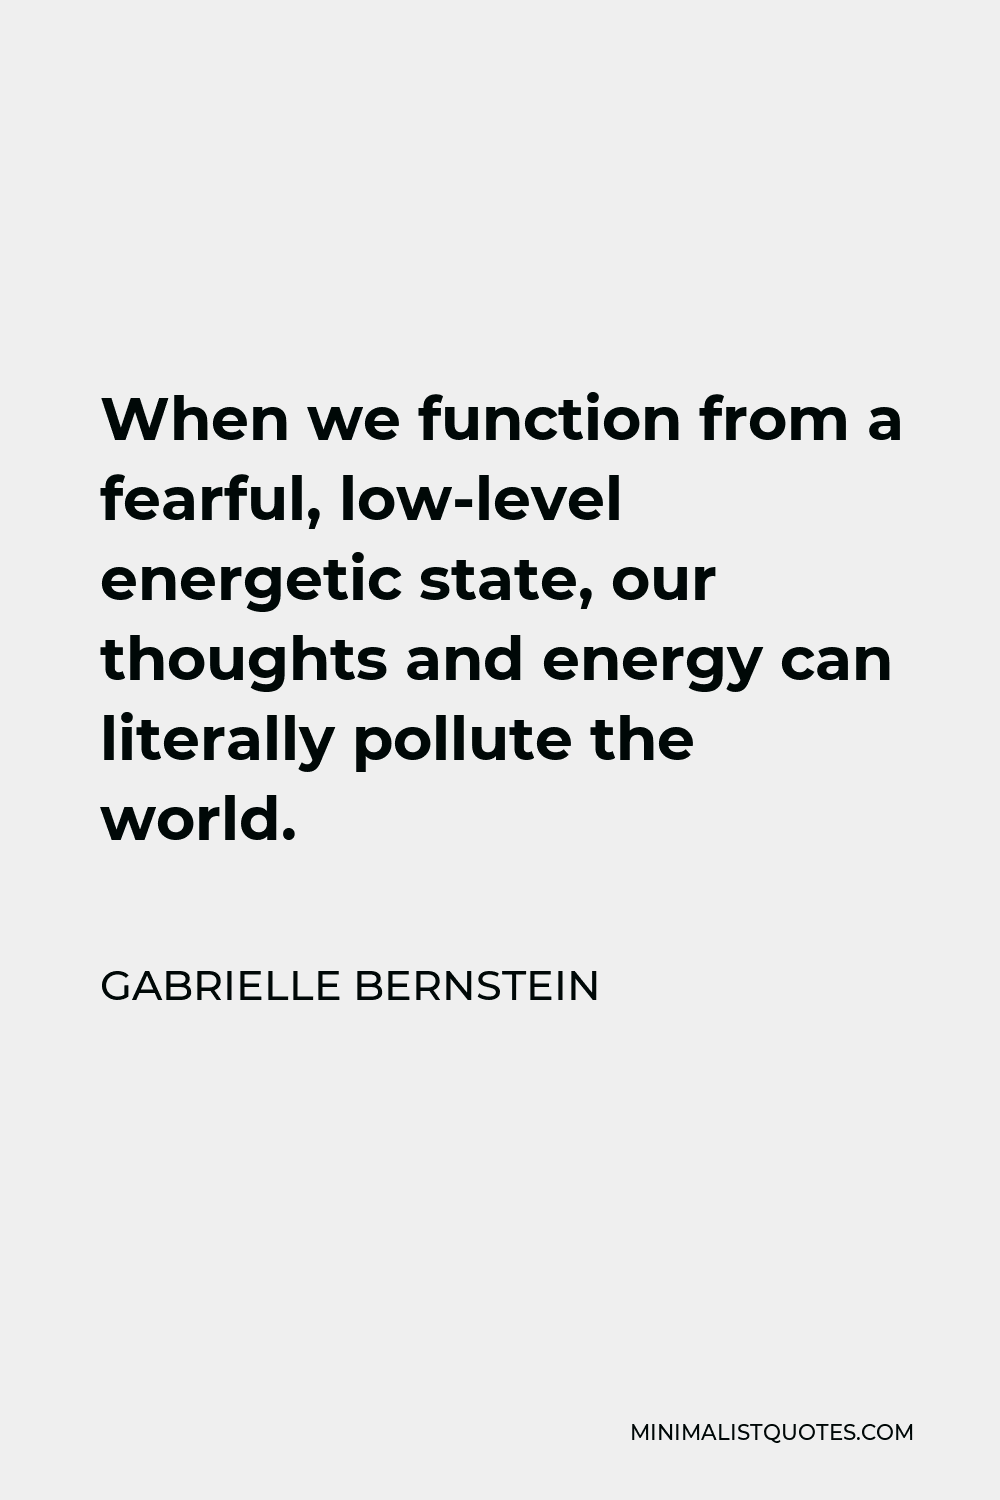 Gabrielle Bernstein Quote - When we function from a fearful, low-level energetic state, our thoughts and energy can literally pollute the world.